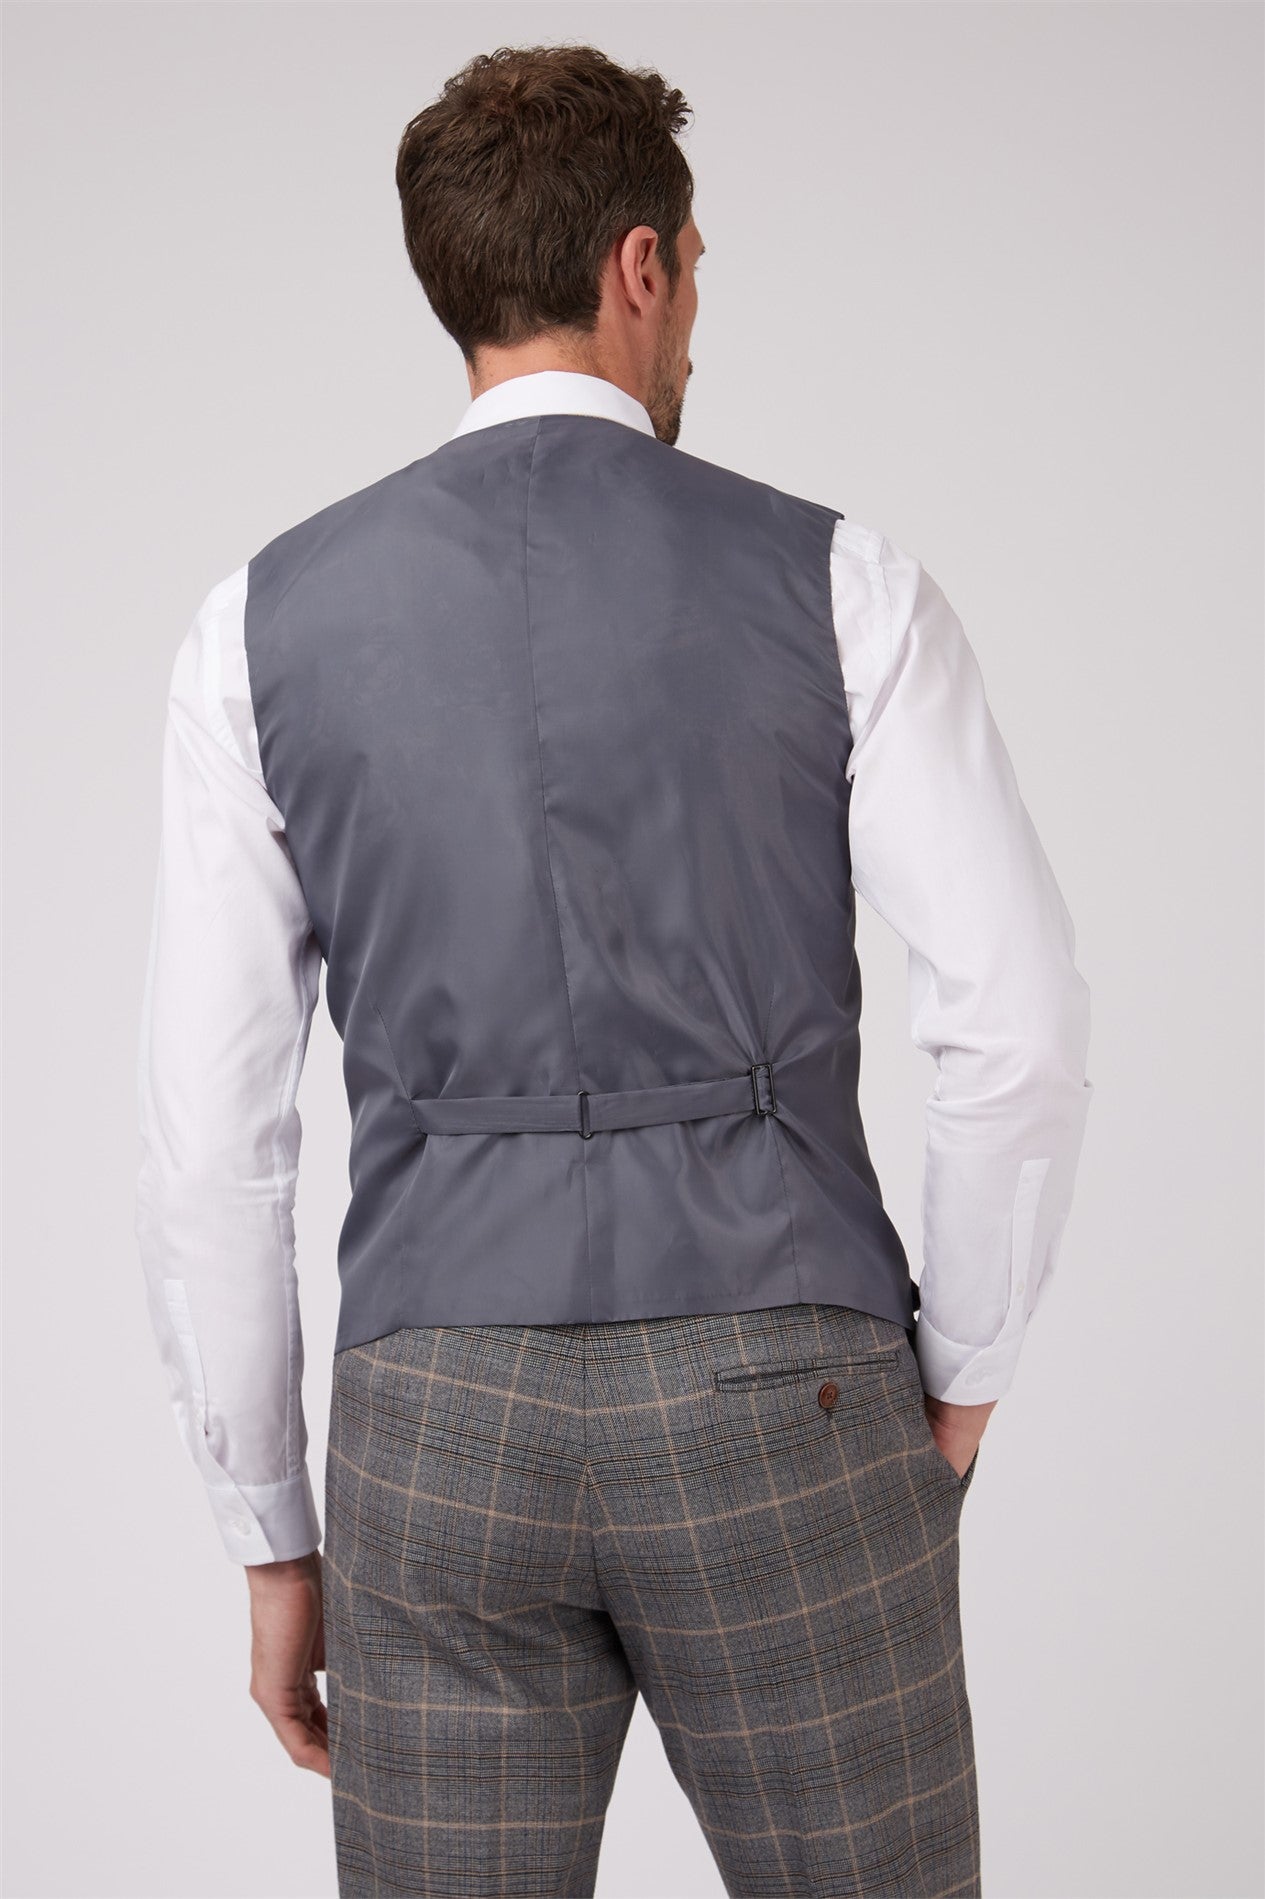 Grey and Tan Over Check from Antique Rogue - Waistcoat